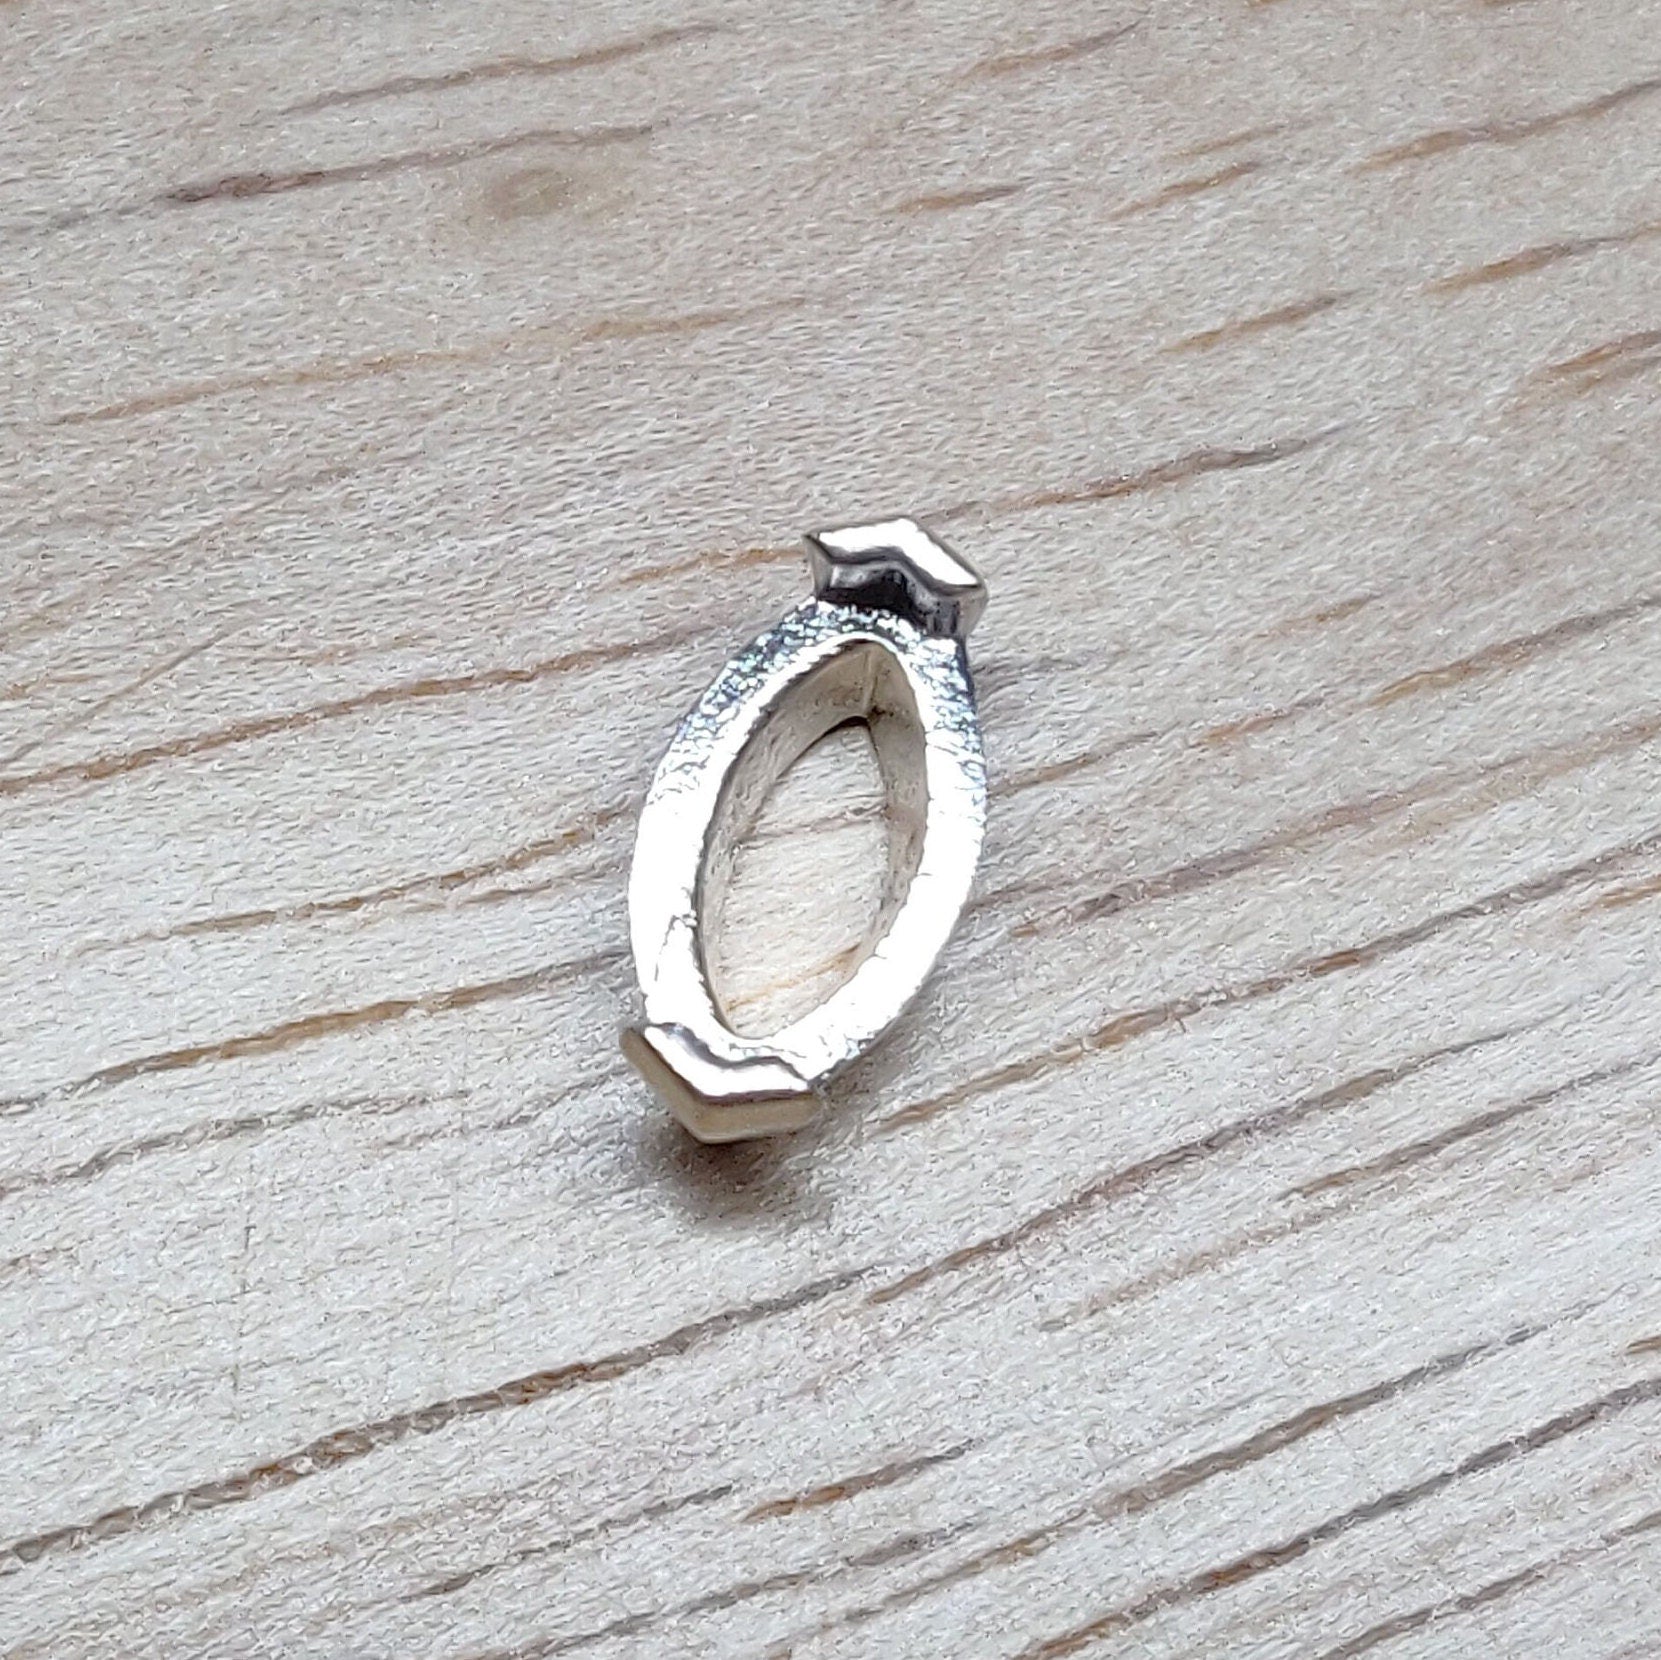 8x4mm Silver Marquise V Prong Claw Setting. Cast Recycled Silver Open-Sided Prong Setting. 9ct Yellow Gold Marquise Setting.